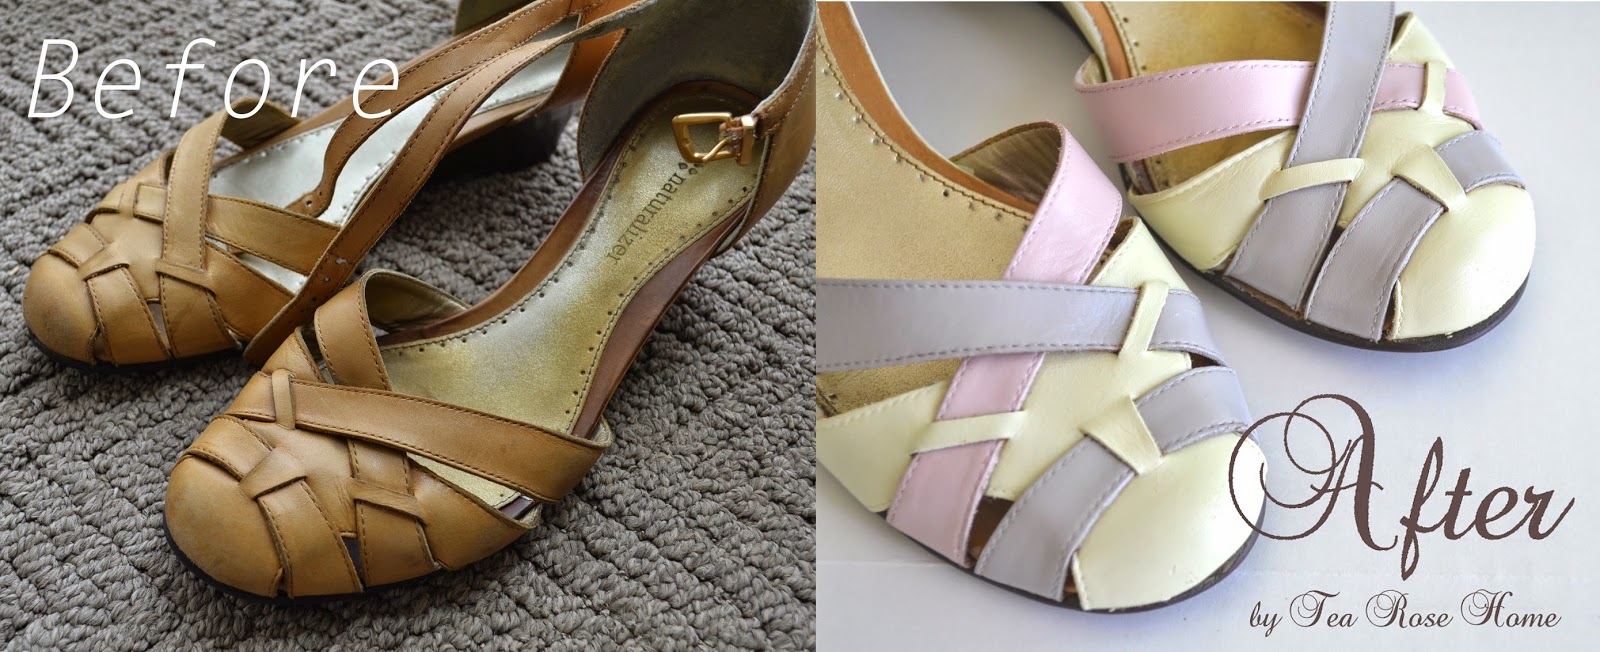 Tea Rose Home: Tutorial ~ How to Paint Leather Shoes